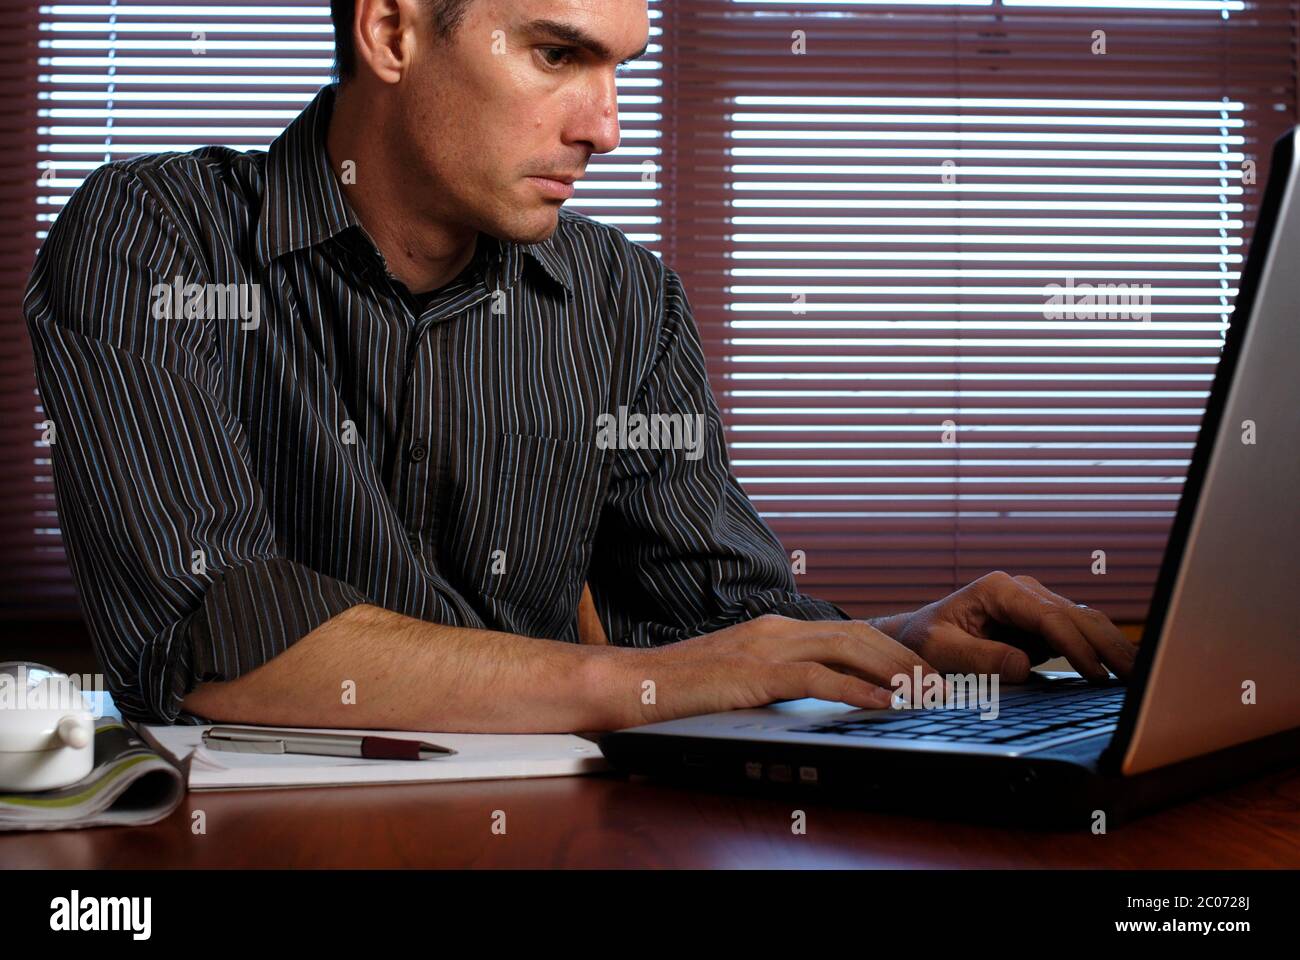 Man working from home on laptop computer Stock Photo